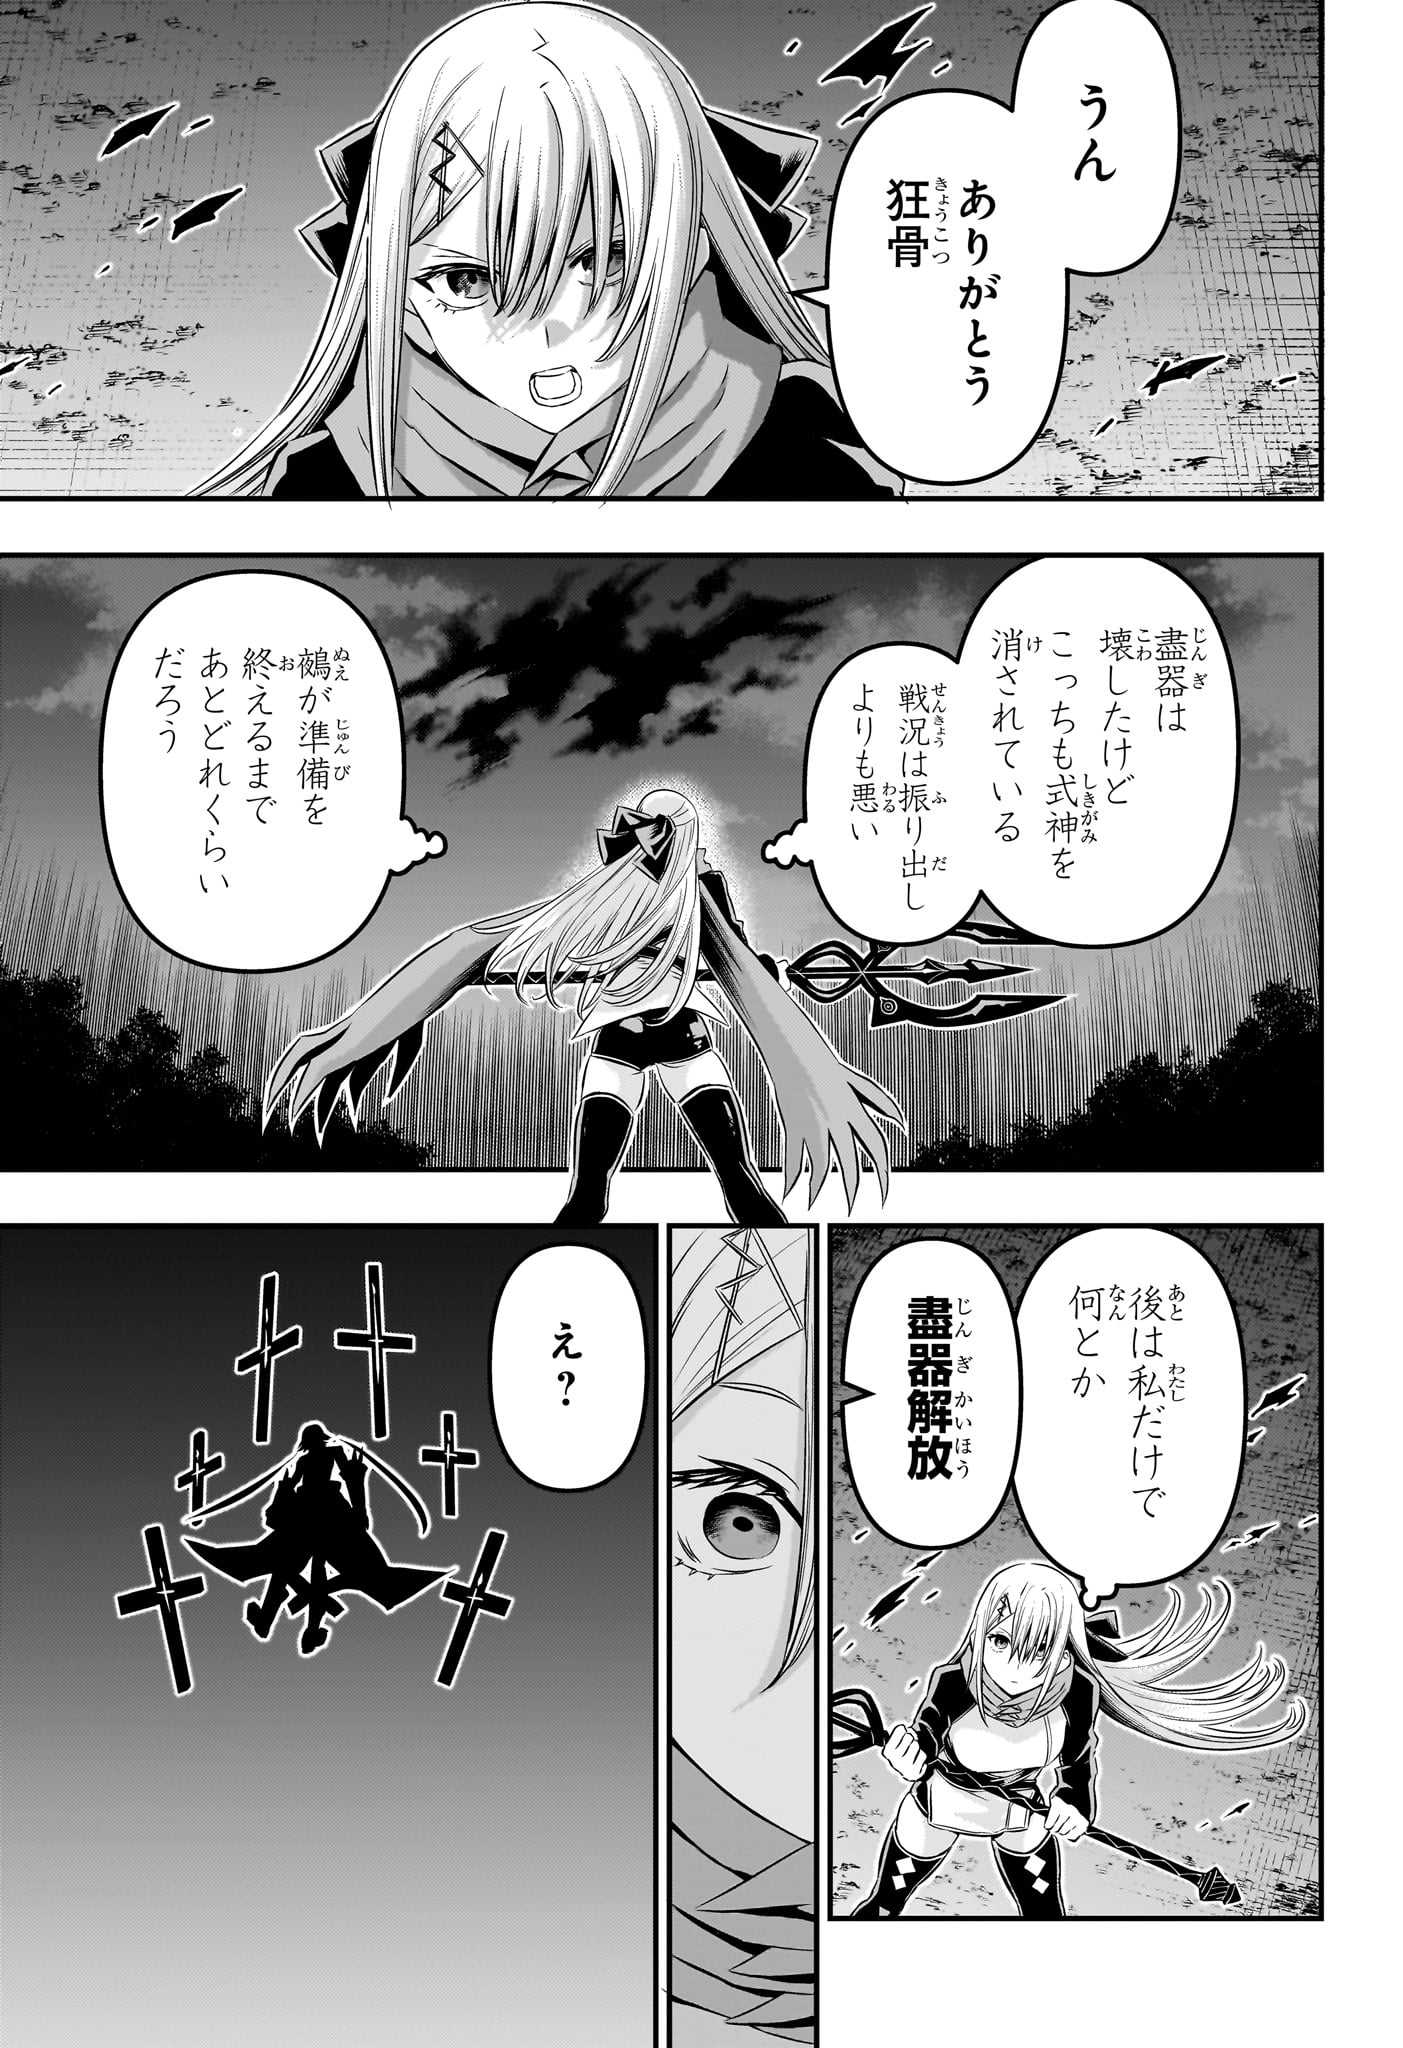 Nue no Onmyouji - Chapter 59 - Page 13